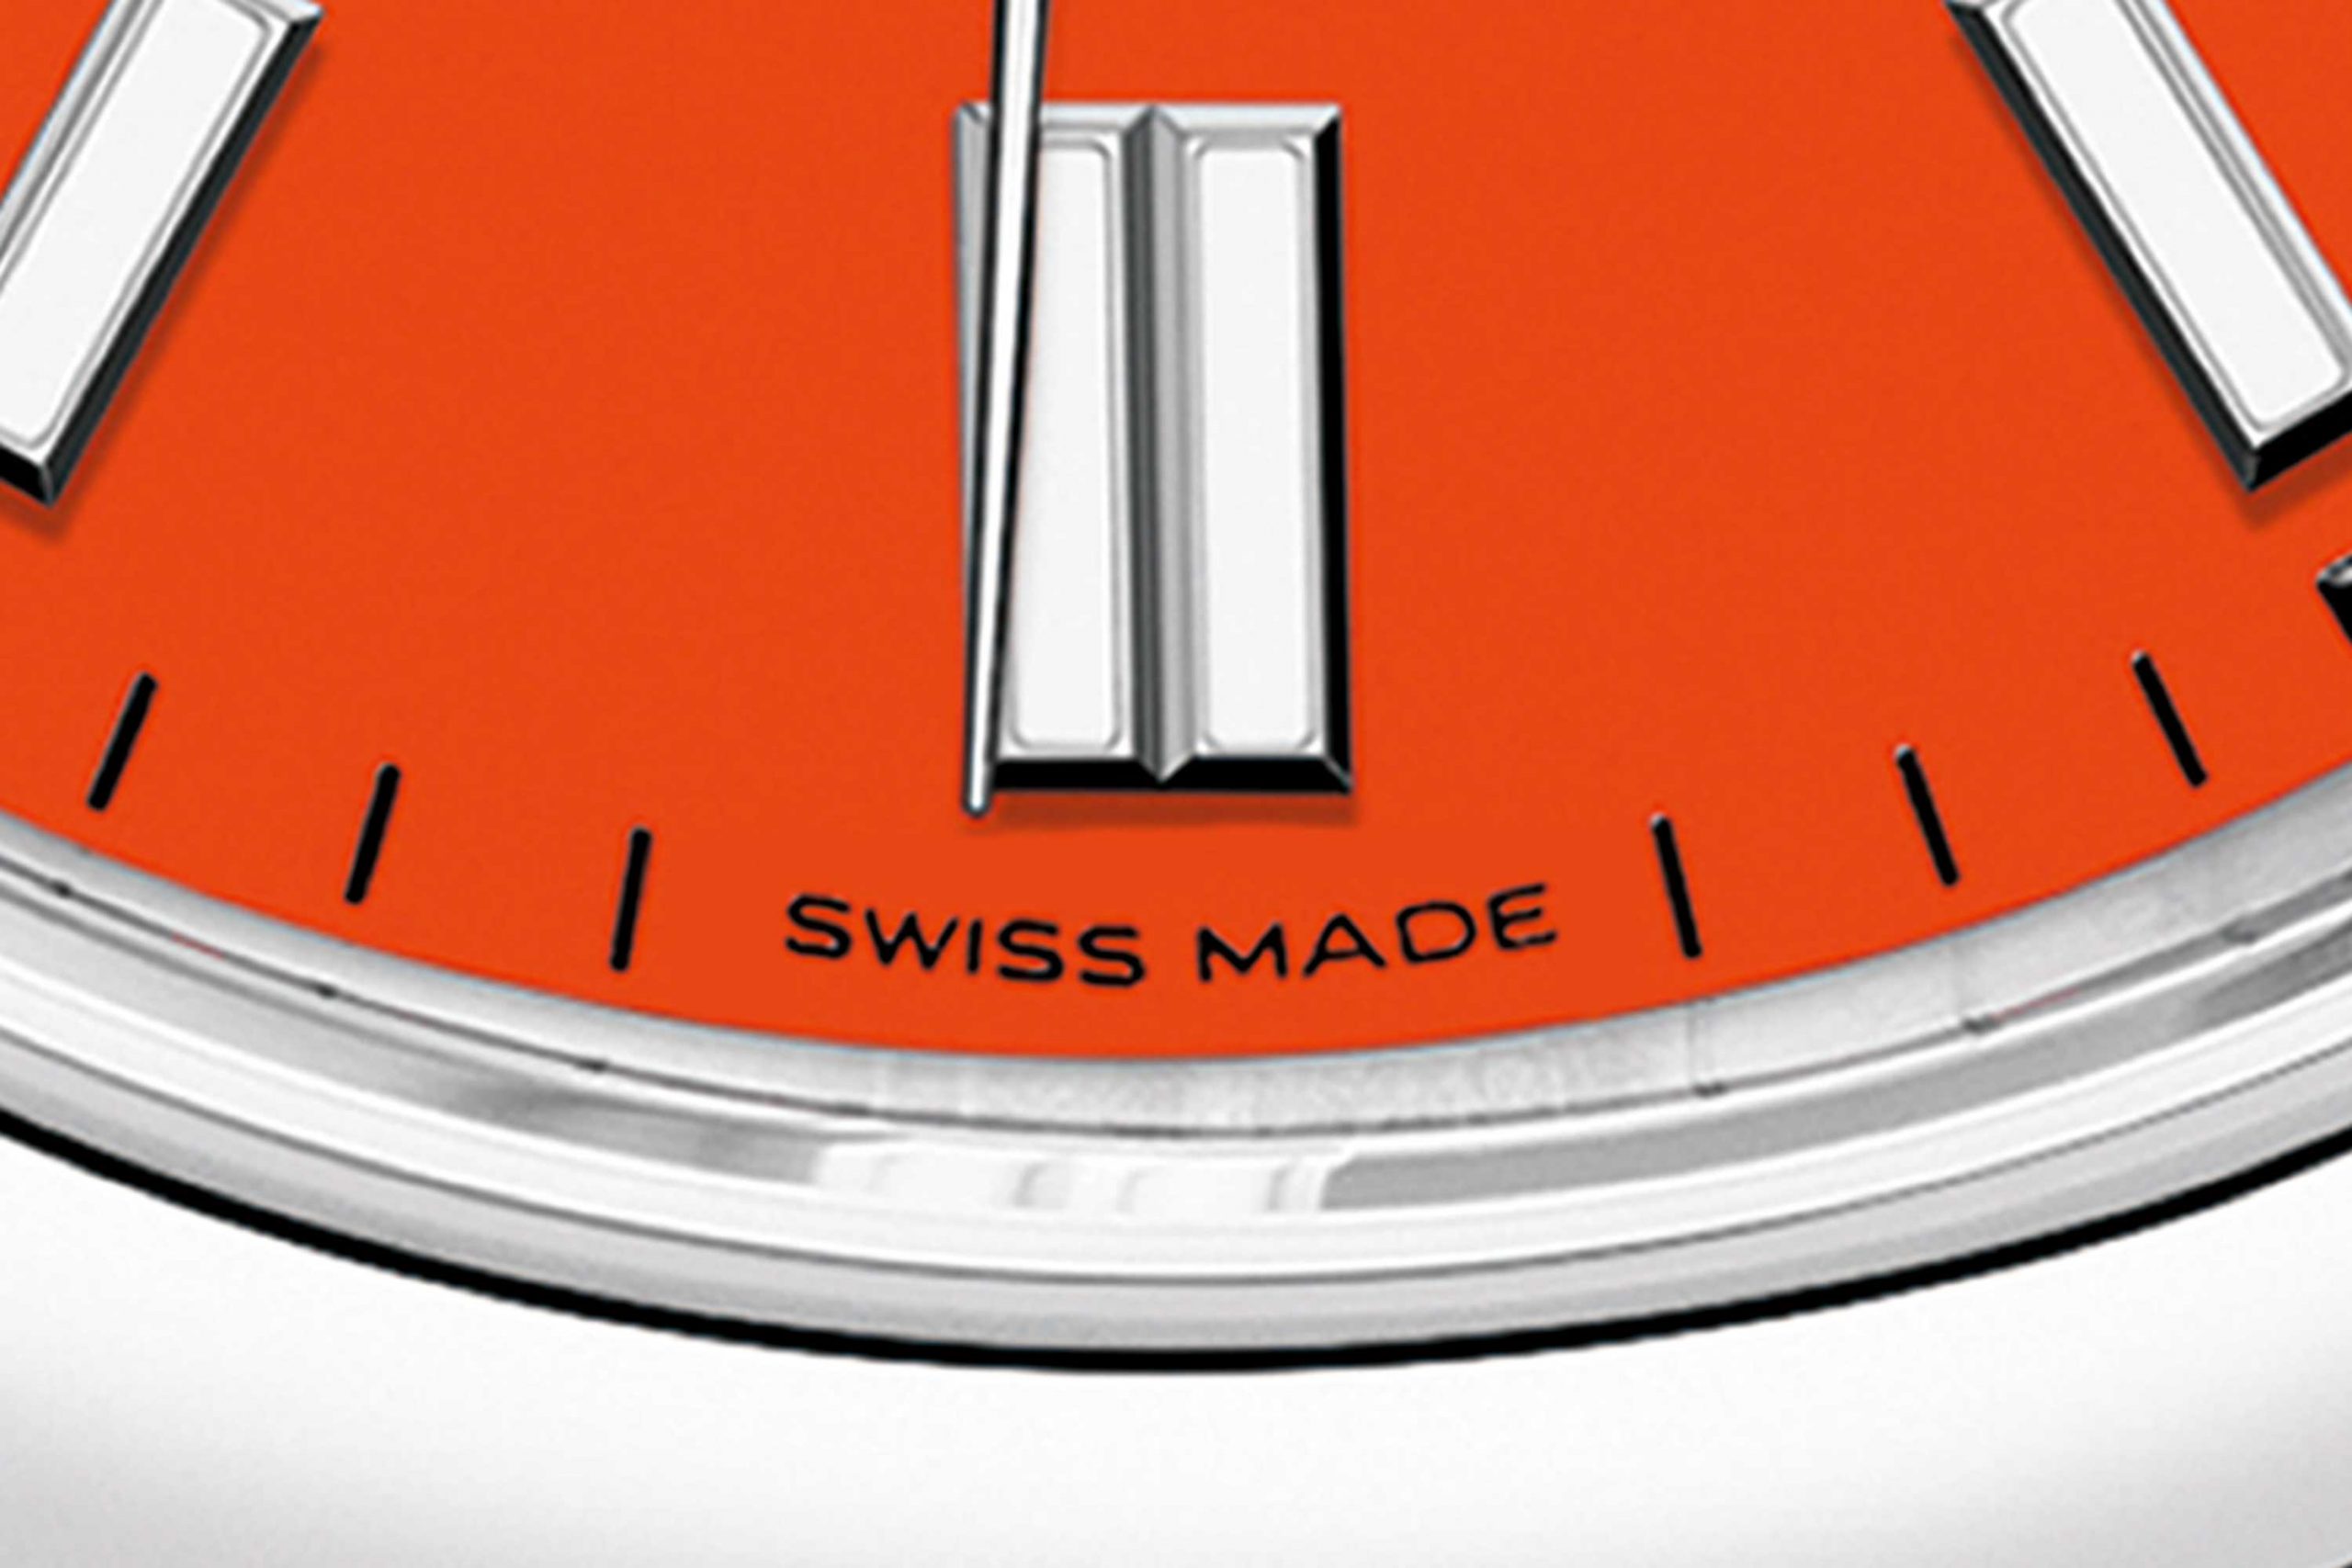 "Swiss Made" — the two words now synonymous with quality and reliability in timepieces